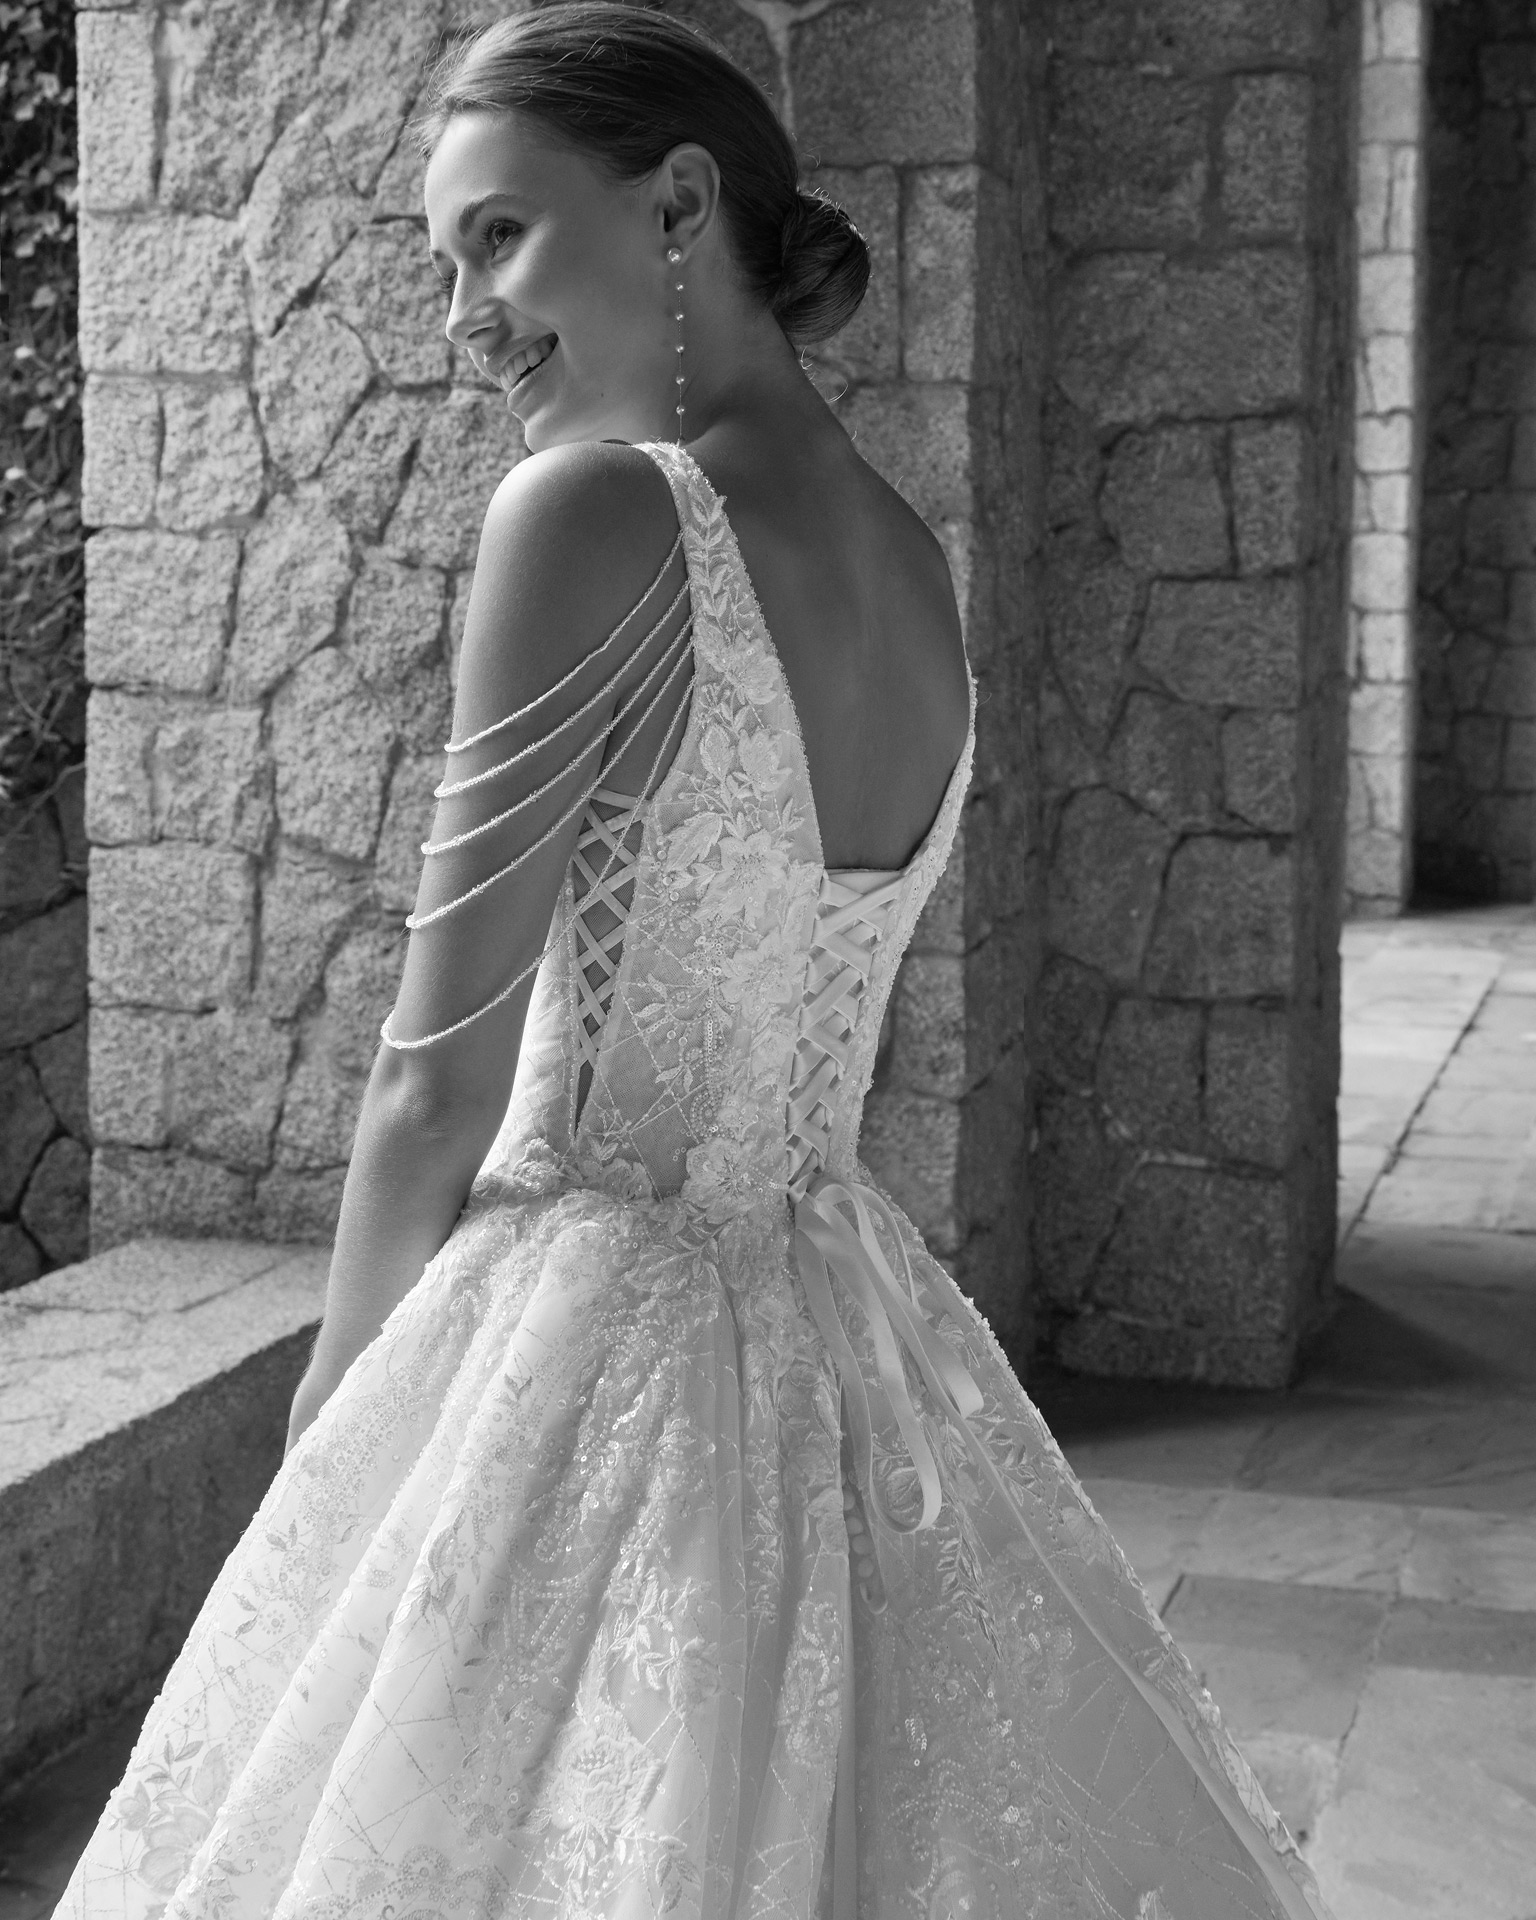 Romantic princess wedding dress, crafted in lace and beadwork. This dreamy Luna Studio gown features a plunging neckline, corset back and beadwork straps. LUNA_NOVIAS.